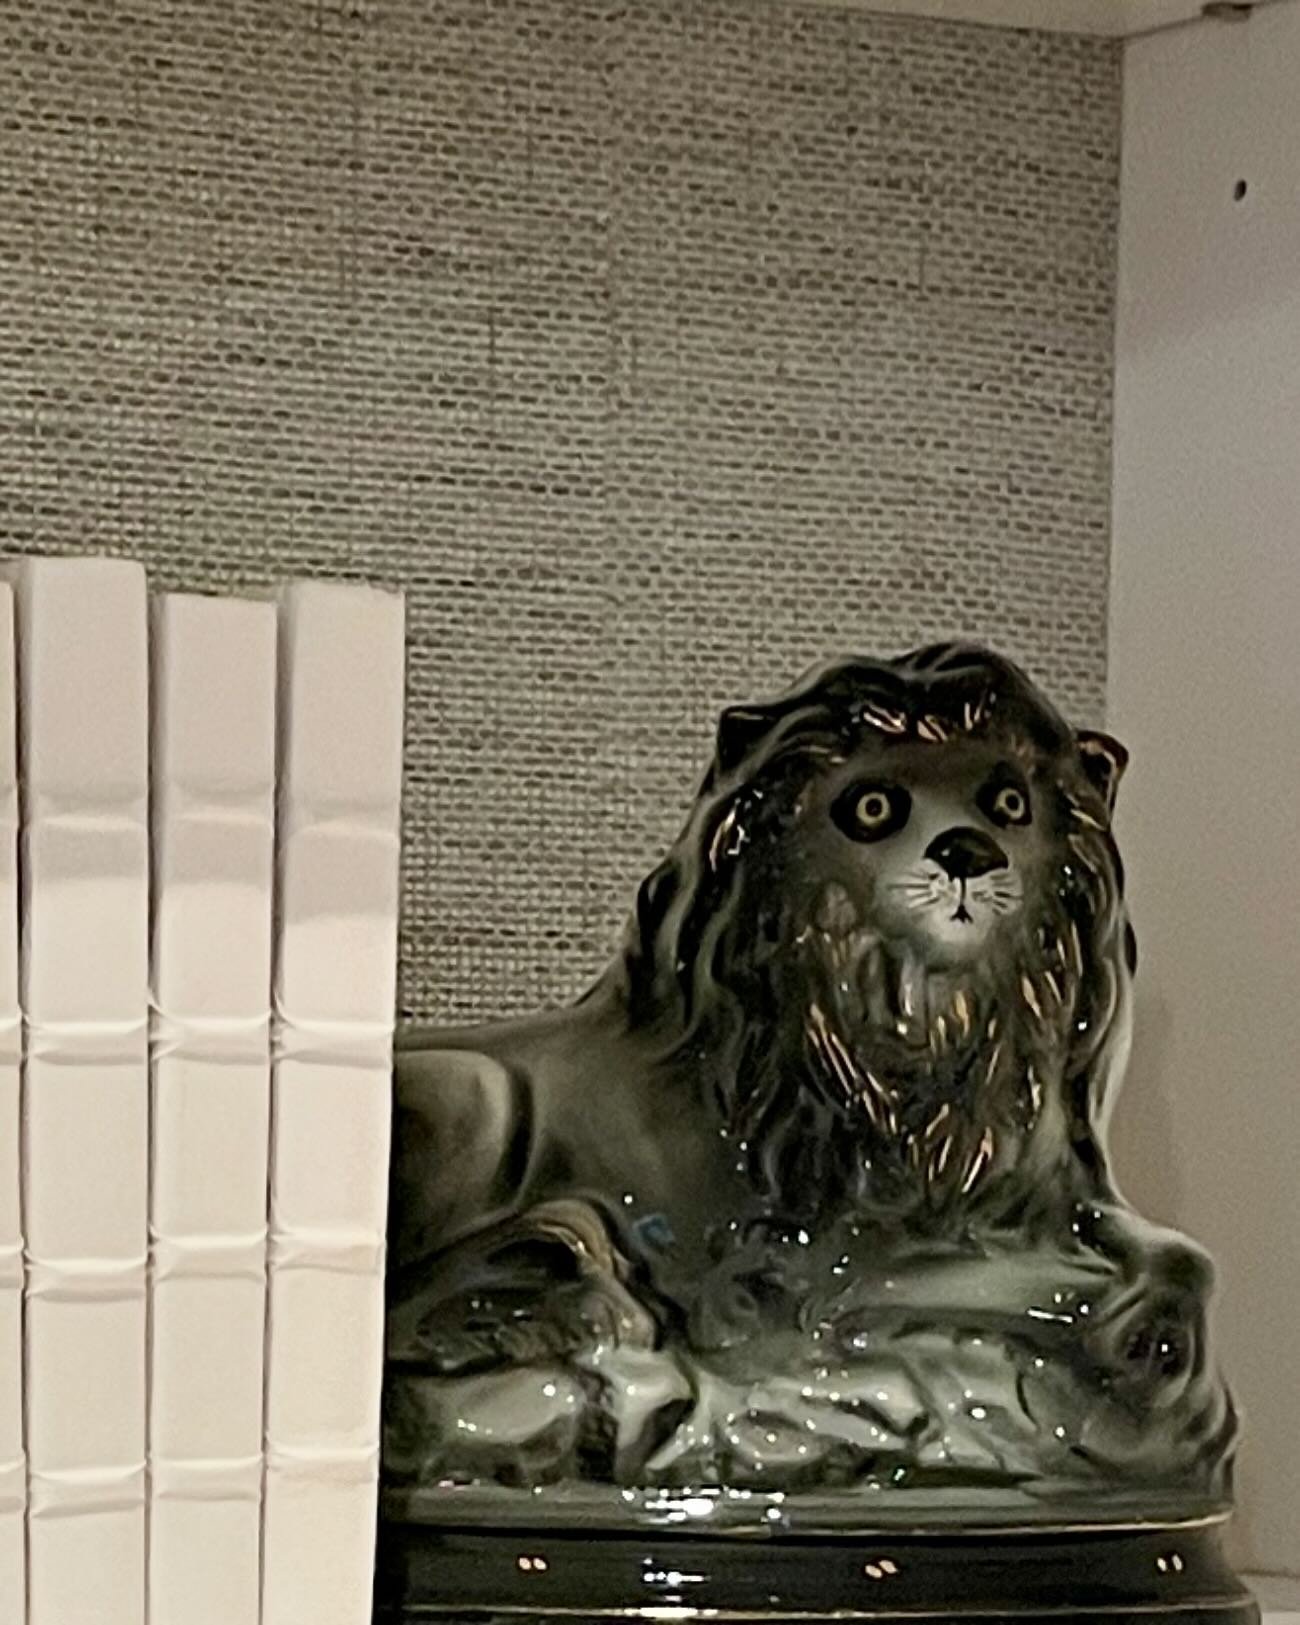 Our lions in their new habitat, with cherished family heirlooms ✨

*
*
*
*
*
#beautiful #antiques #interiordesign #staffordshire #traditionalhome